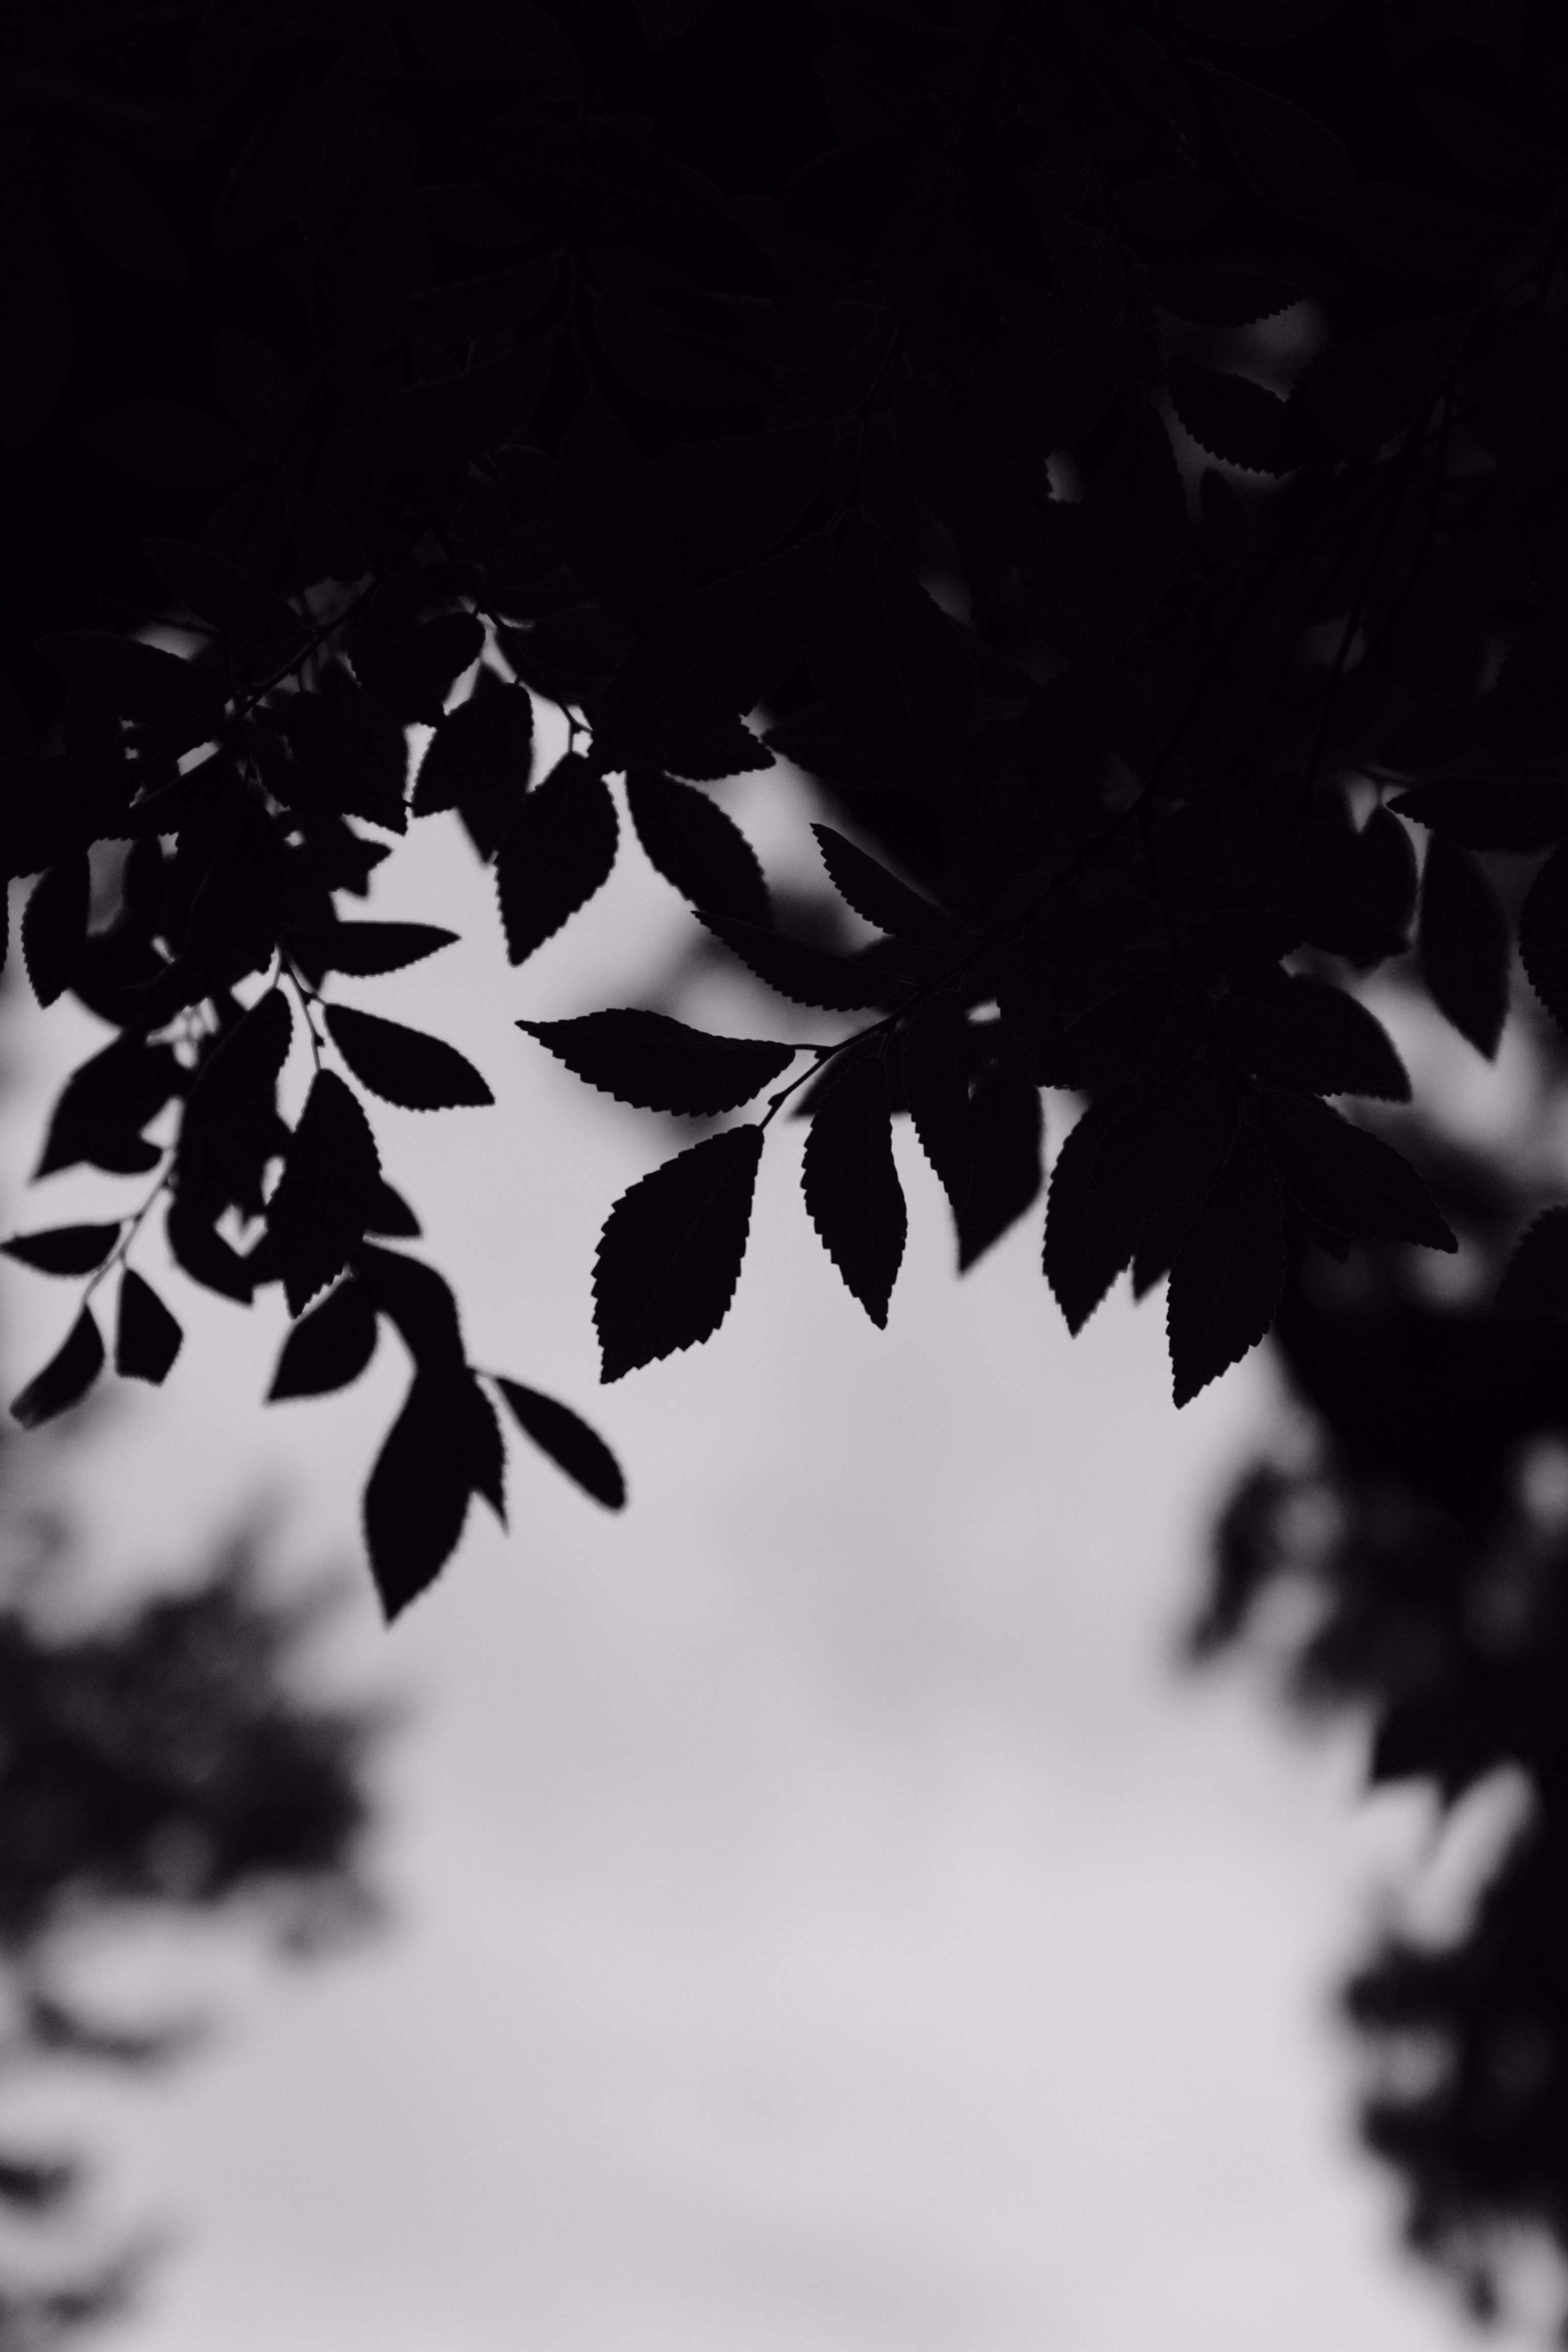 leaves, outlines, black, chb, branches, bw phone background